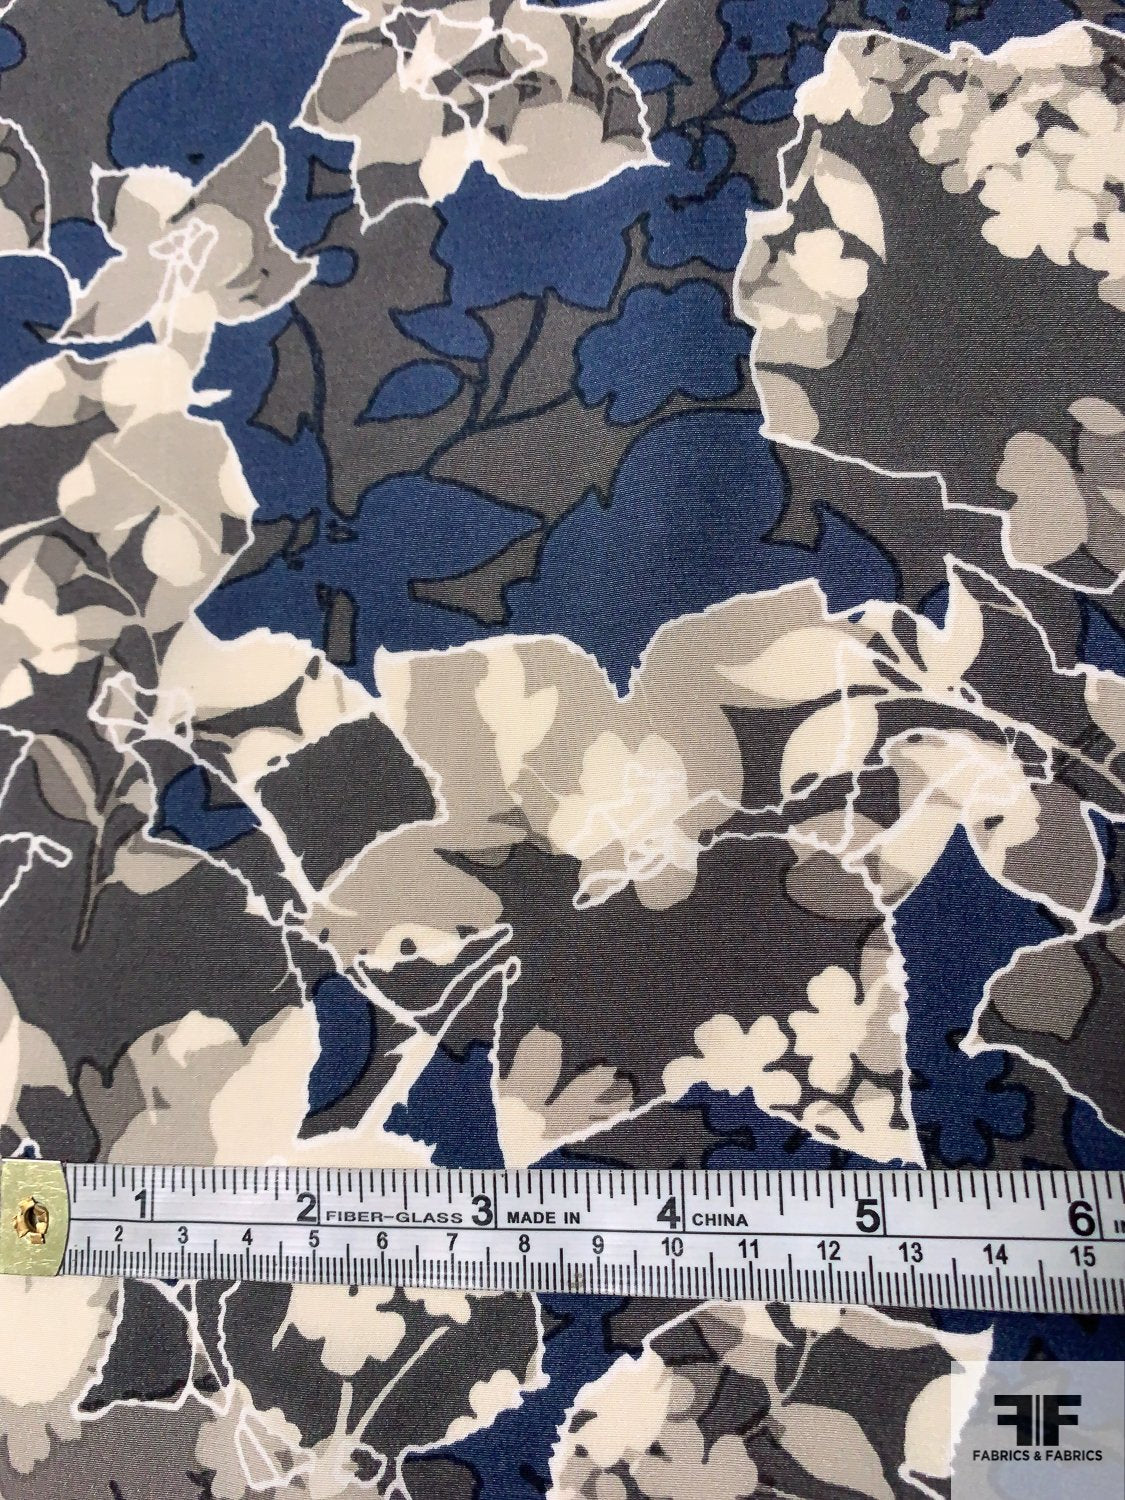 Floral Sketch Silhouette Printed Silk Crepe de Chine - Dusk Navy / Grets / White